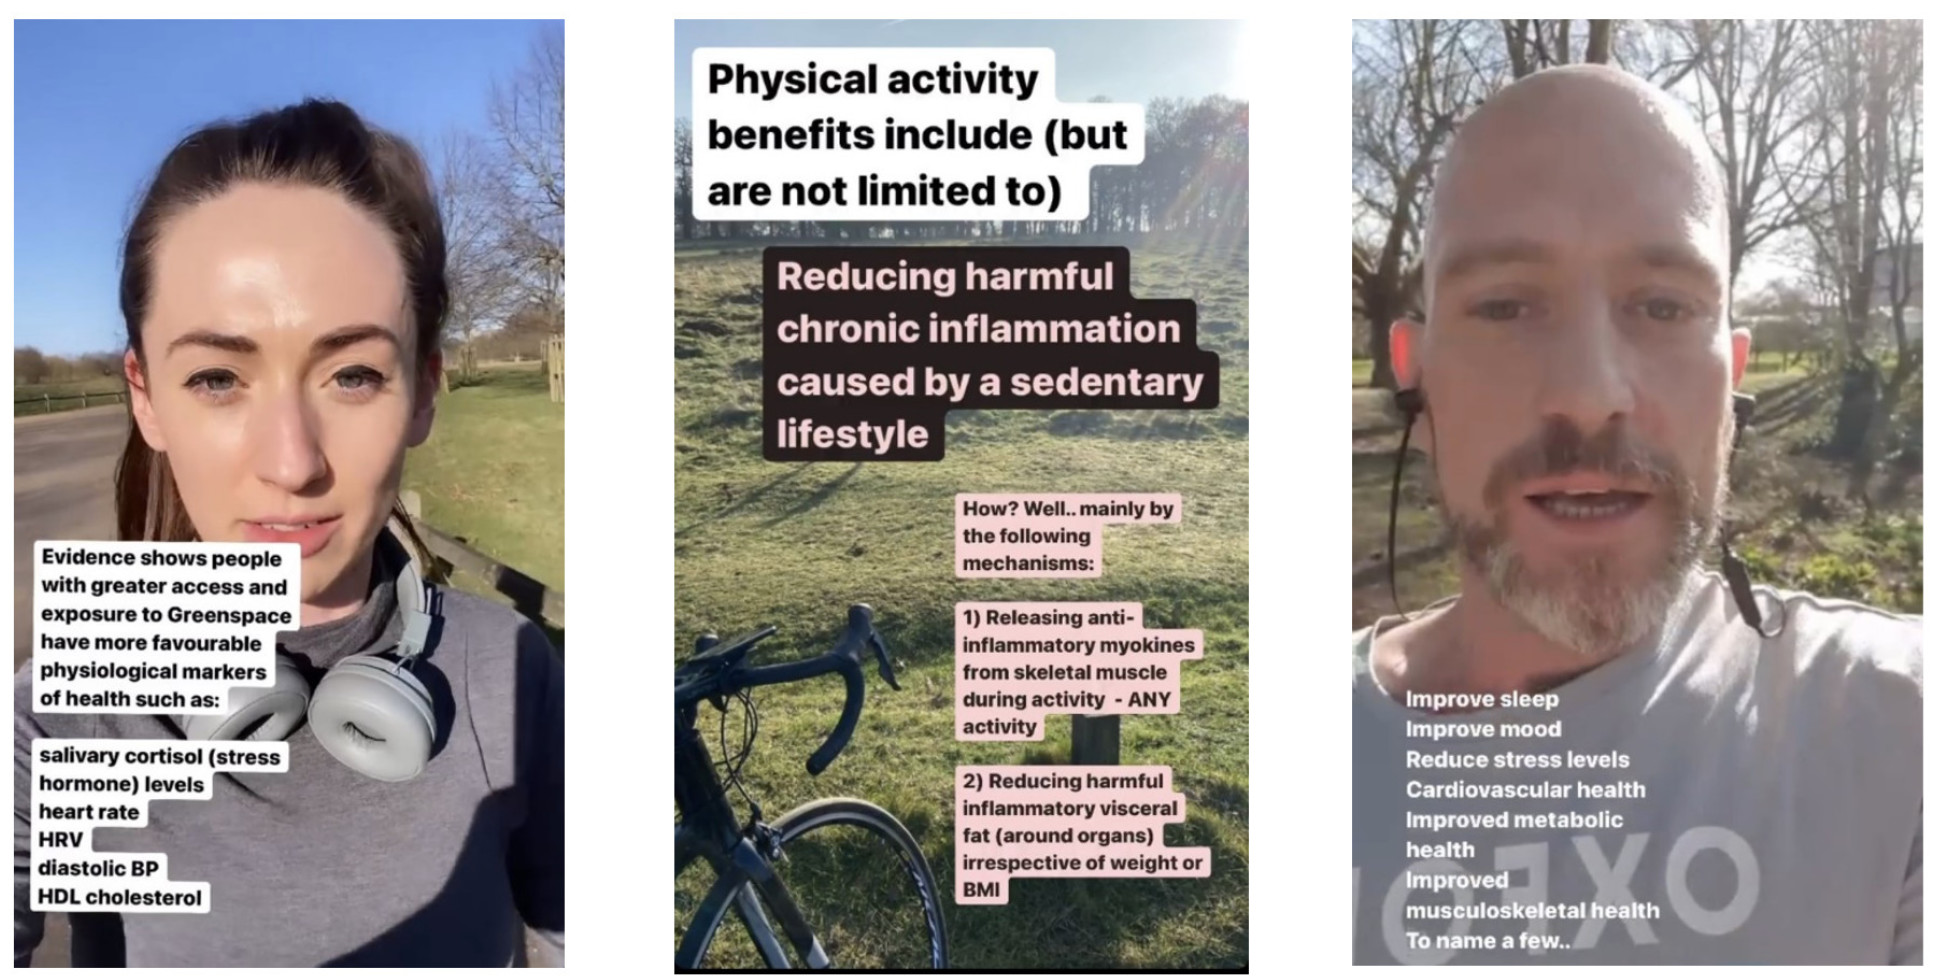 LMAP-related Instagram content delivered by Dr Amy Bannerman and Dr Christopher Harvey 